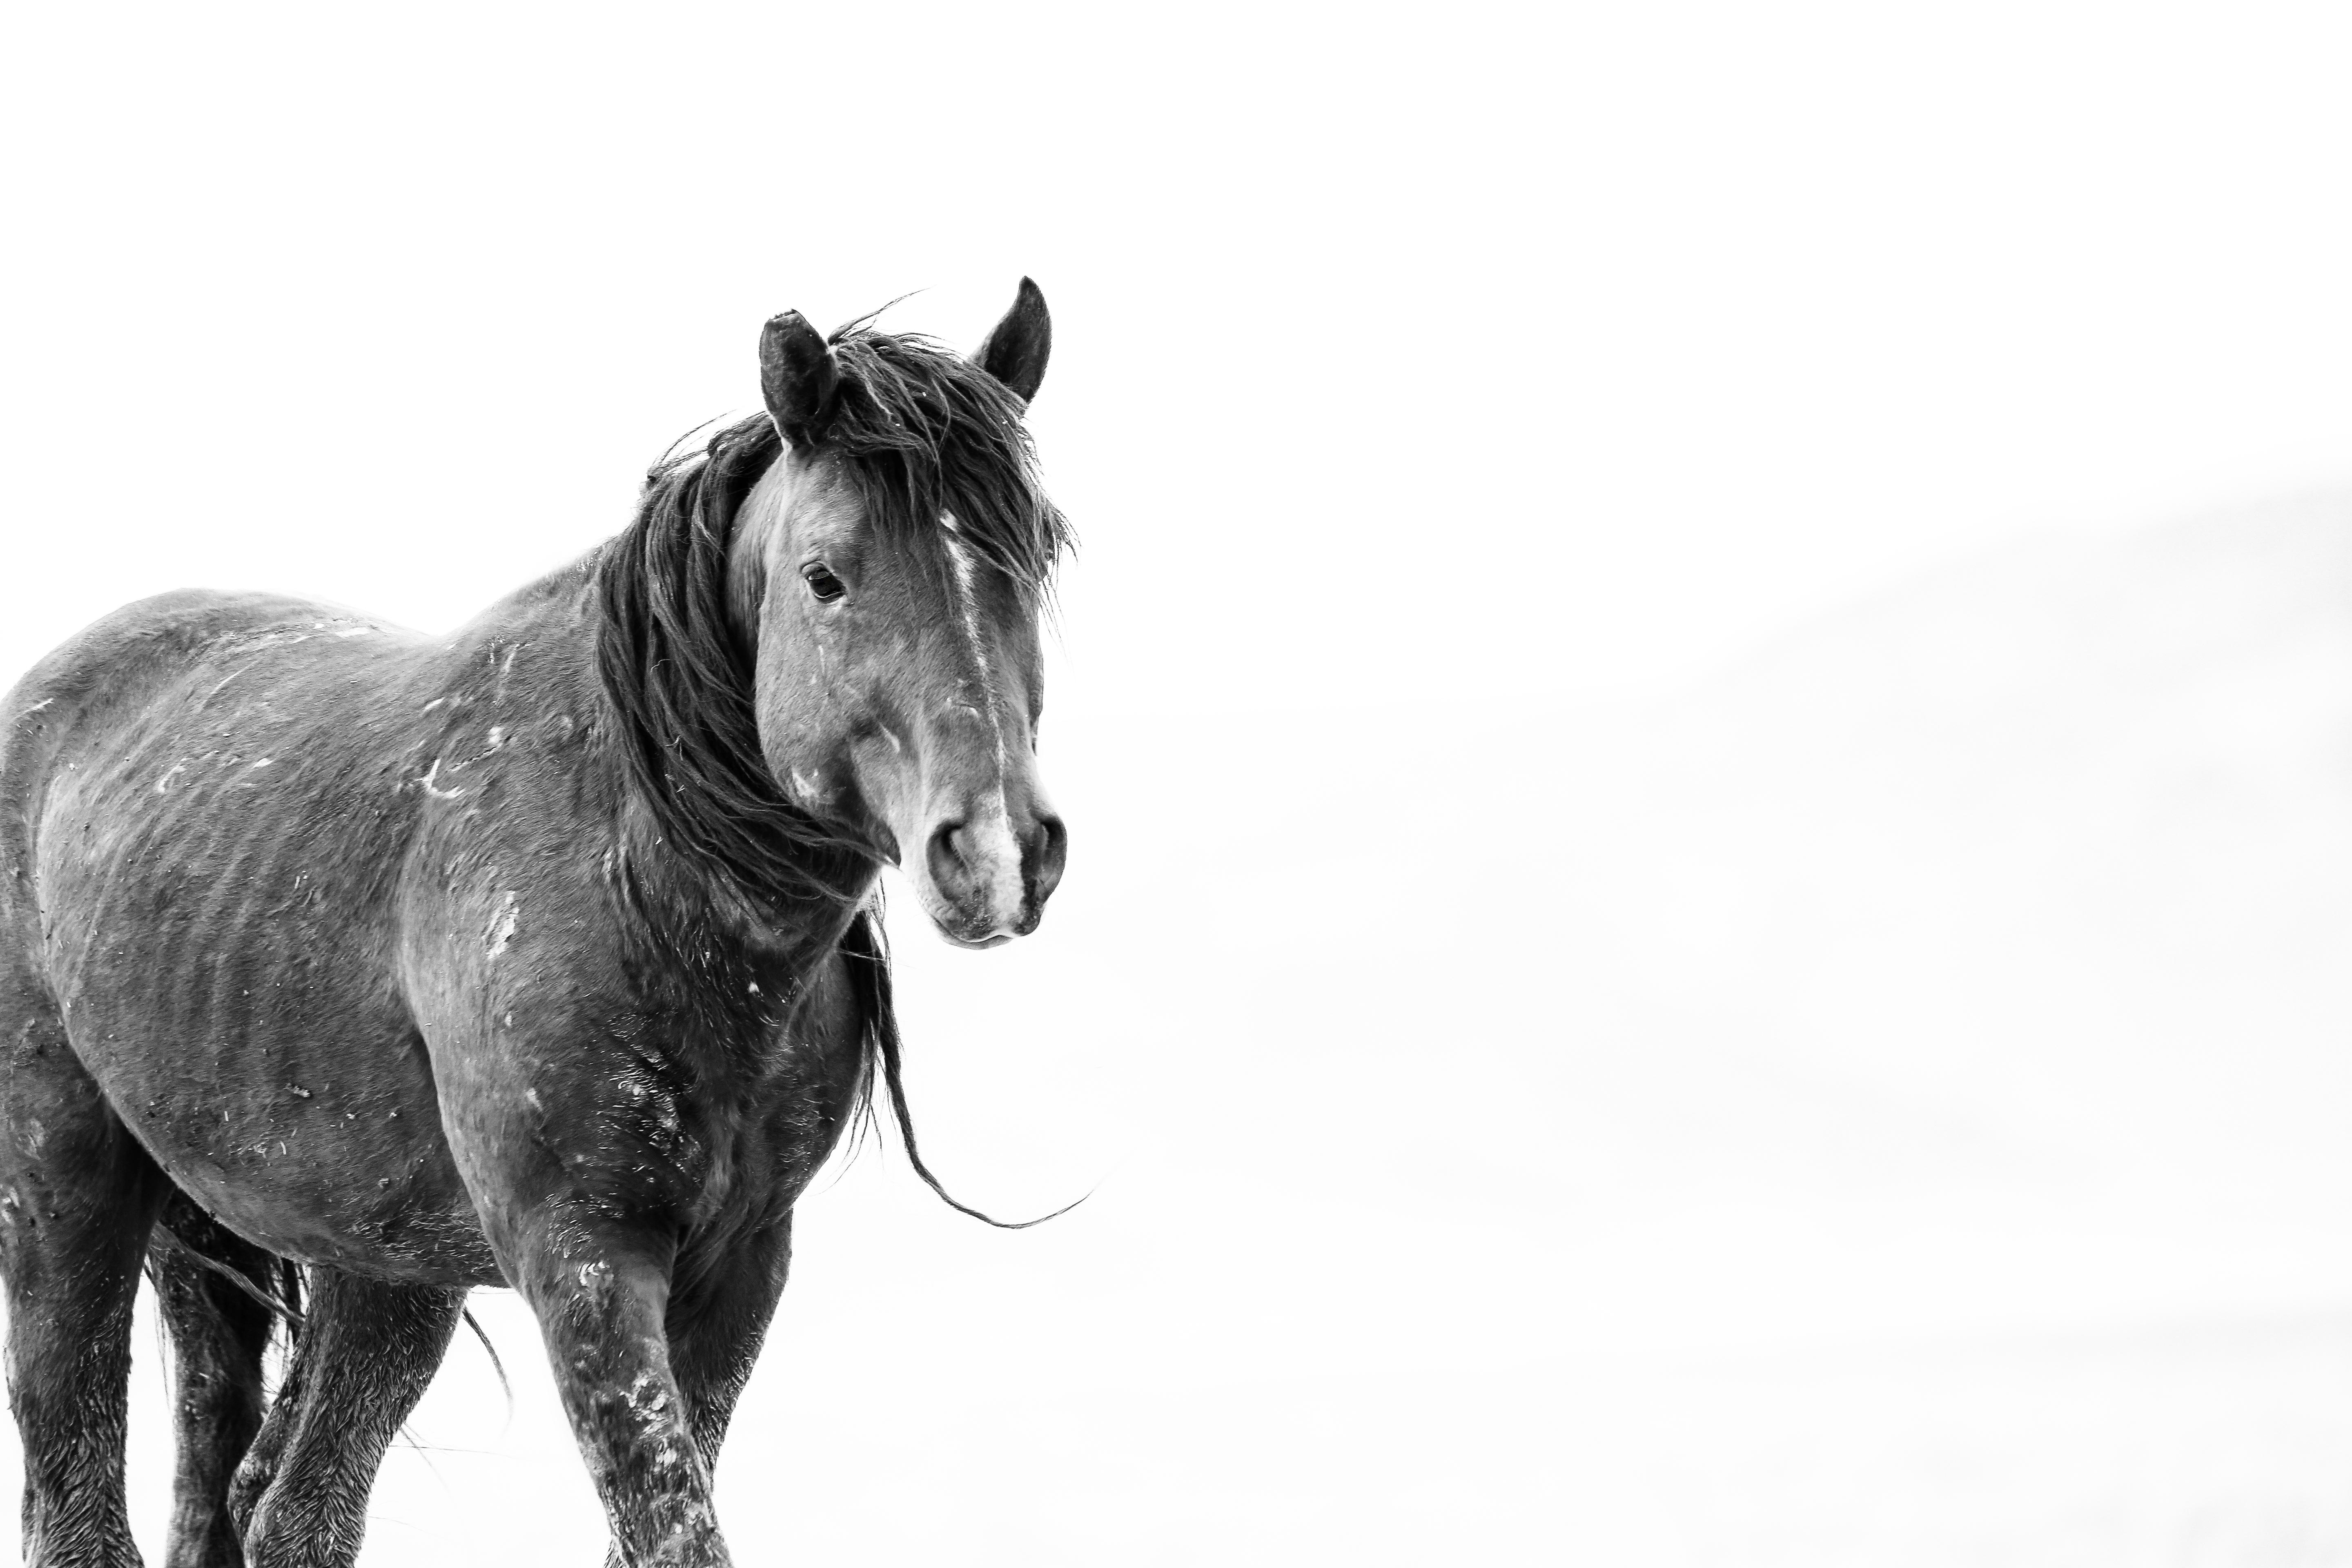 Shane Russeck Black and White Photograph - SOLO 36x48  Black & White Photography, Wild Horses Mustang Fine Art Unsiged